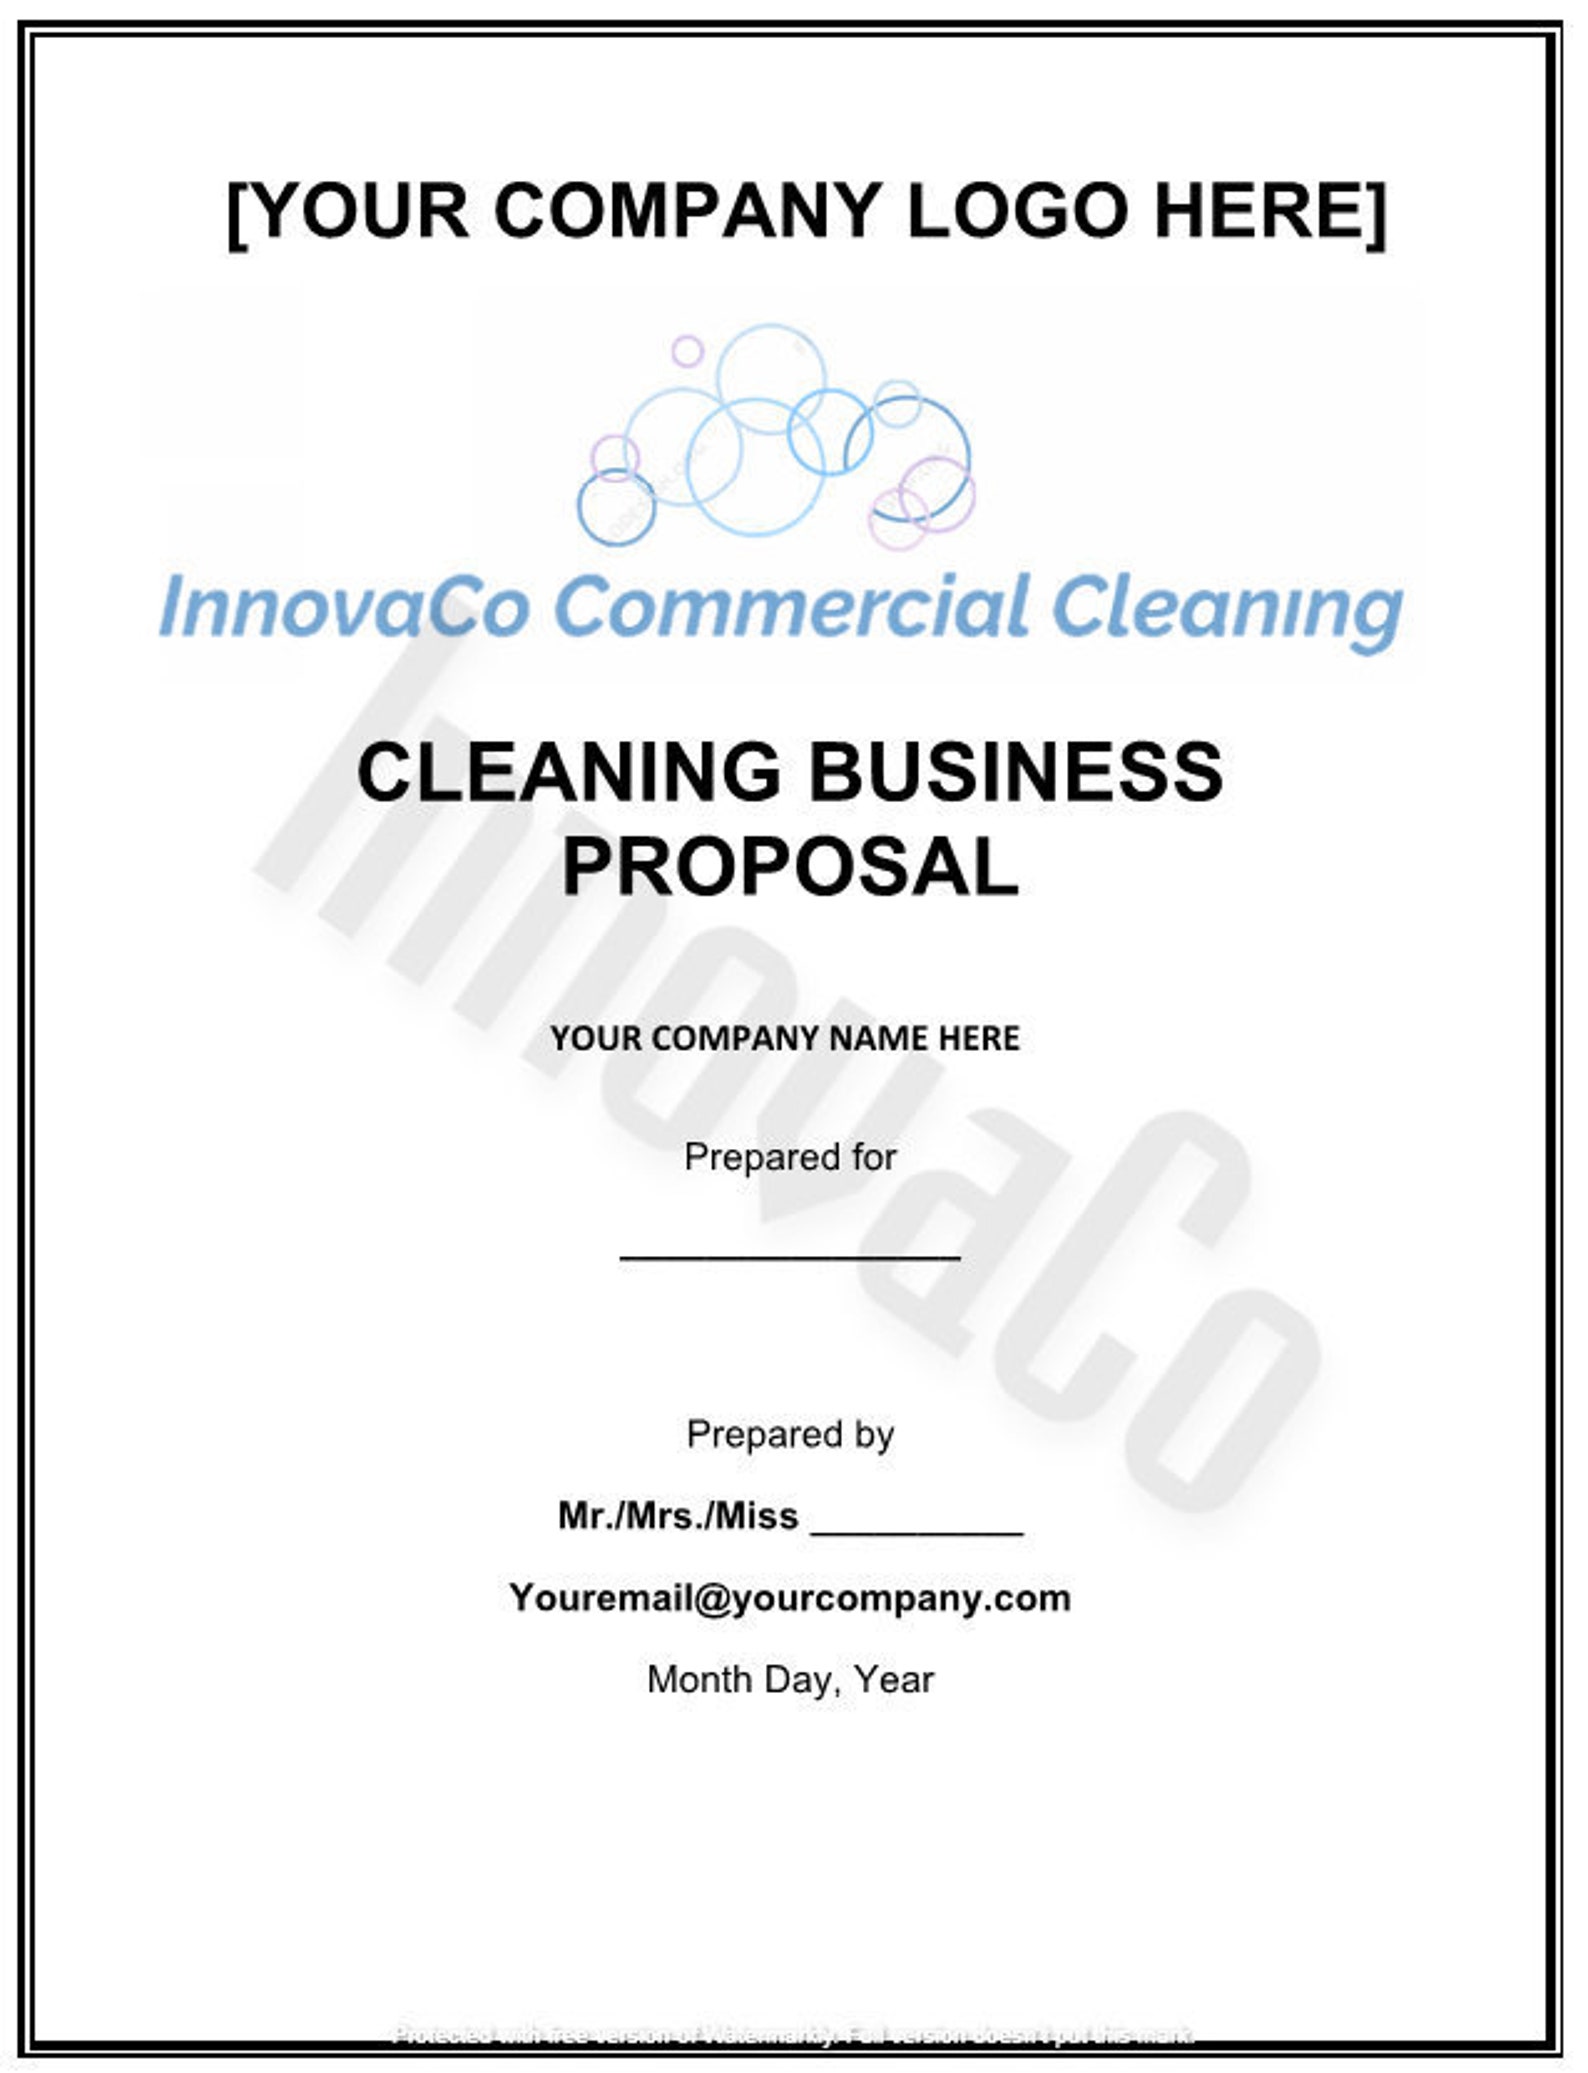 commercial cleaning service business plan pdf